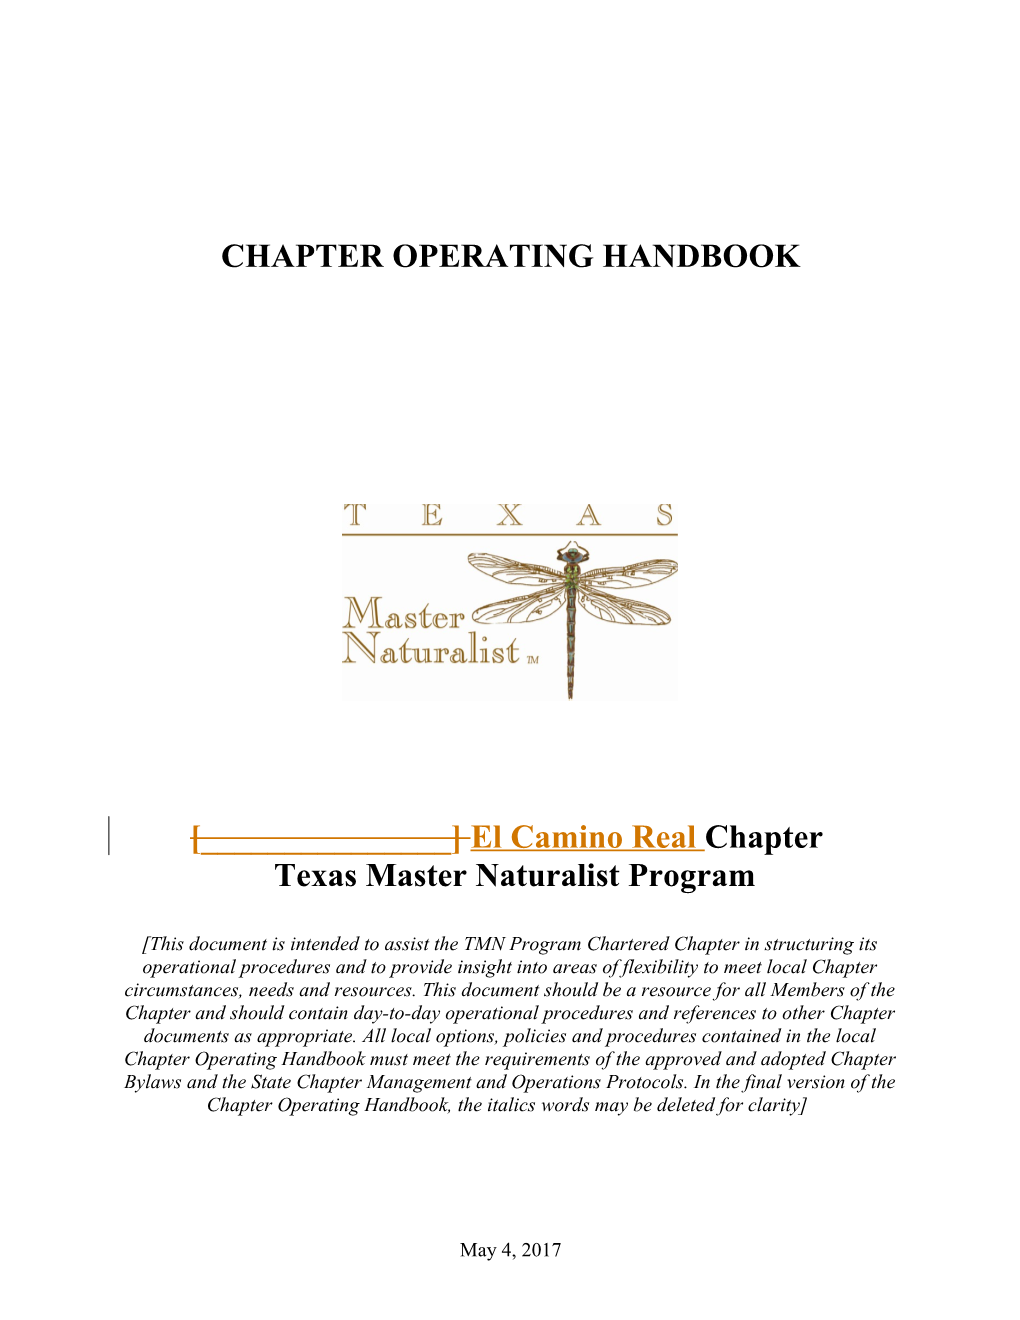 Bylaws of the ______ Chapter of the Texas Master Naturalist Program